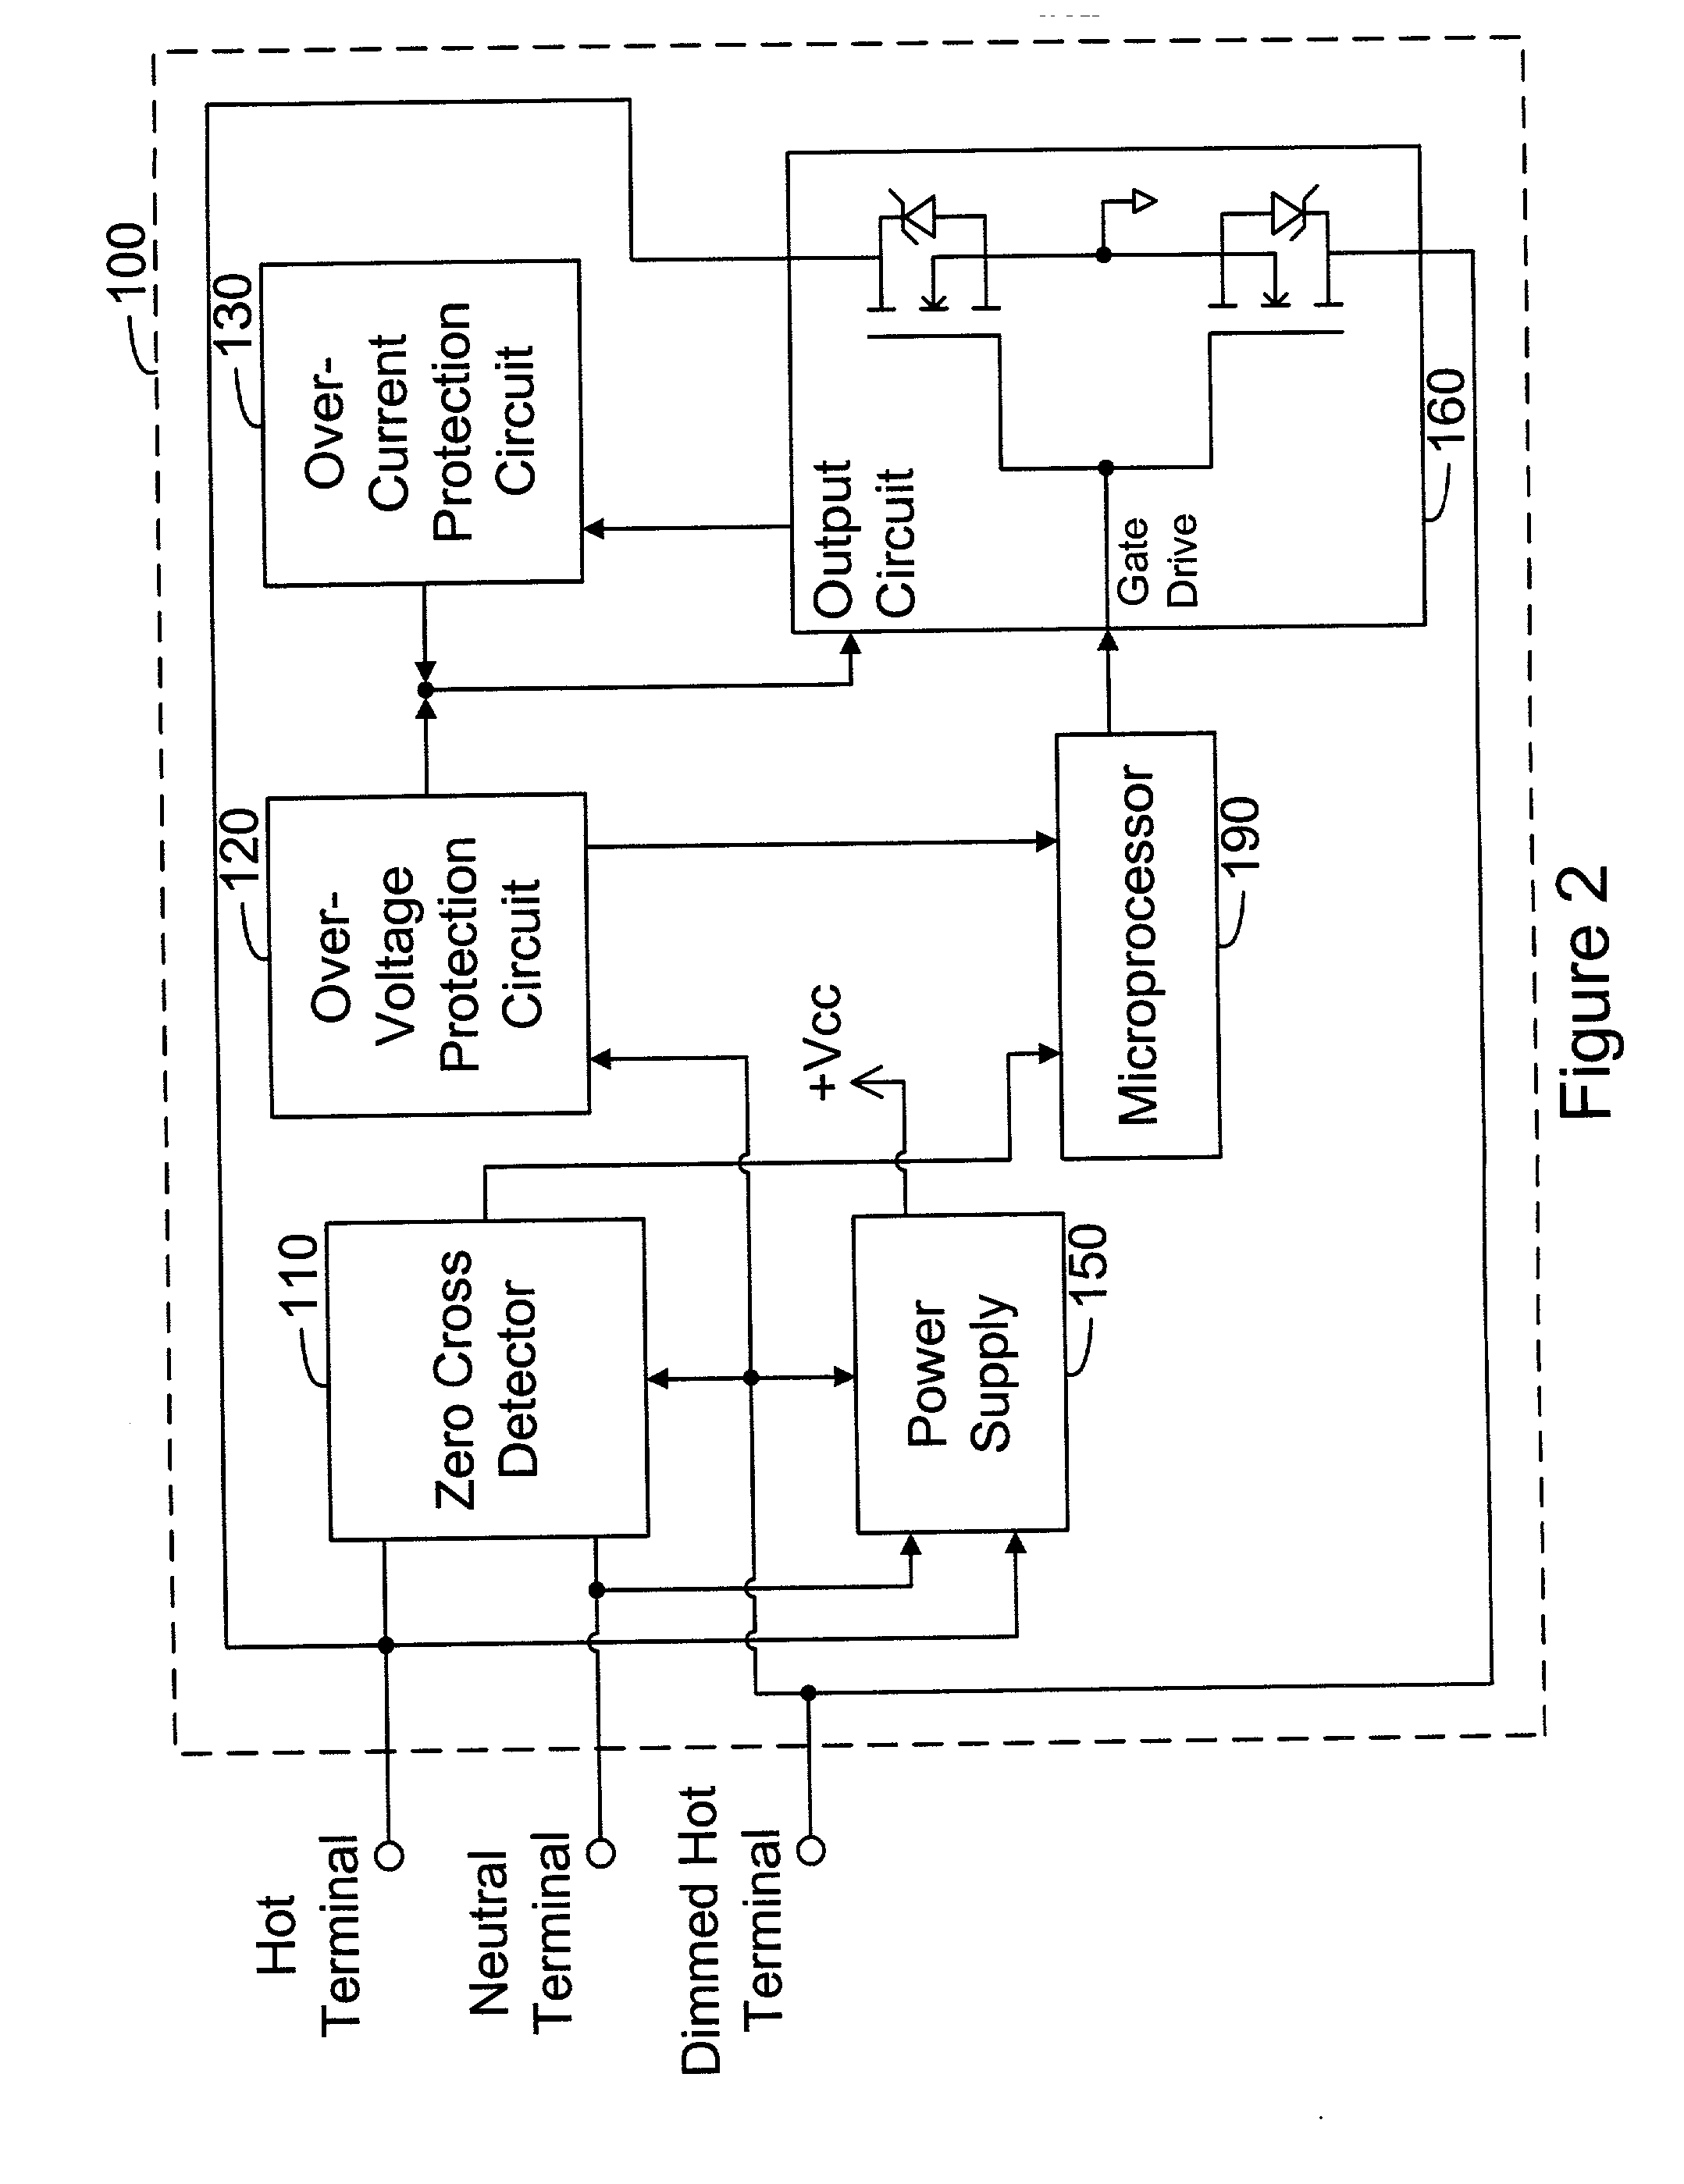 Electronic control systems and methods